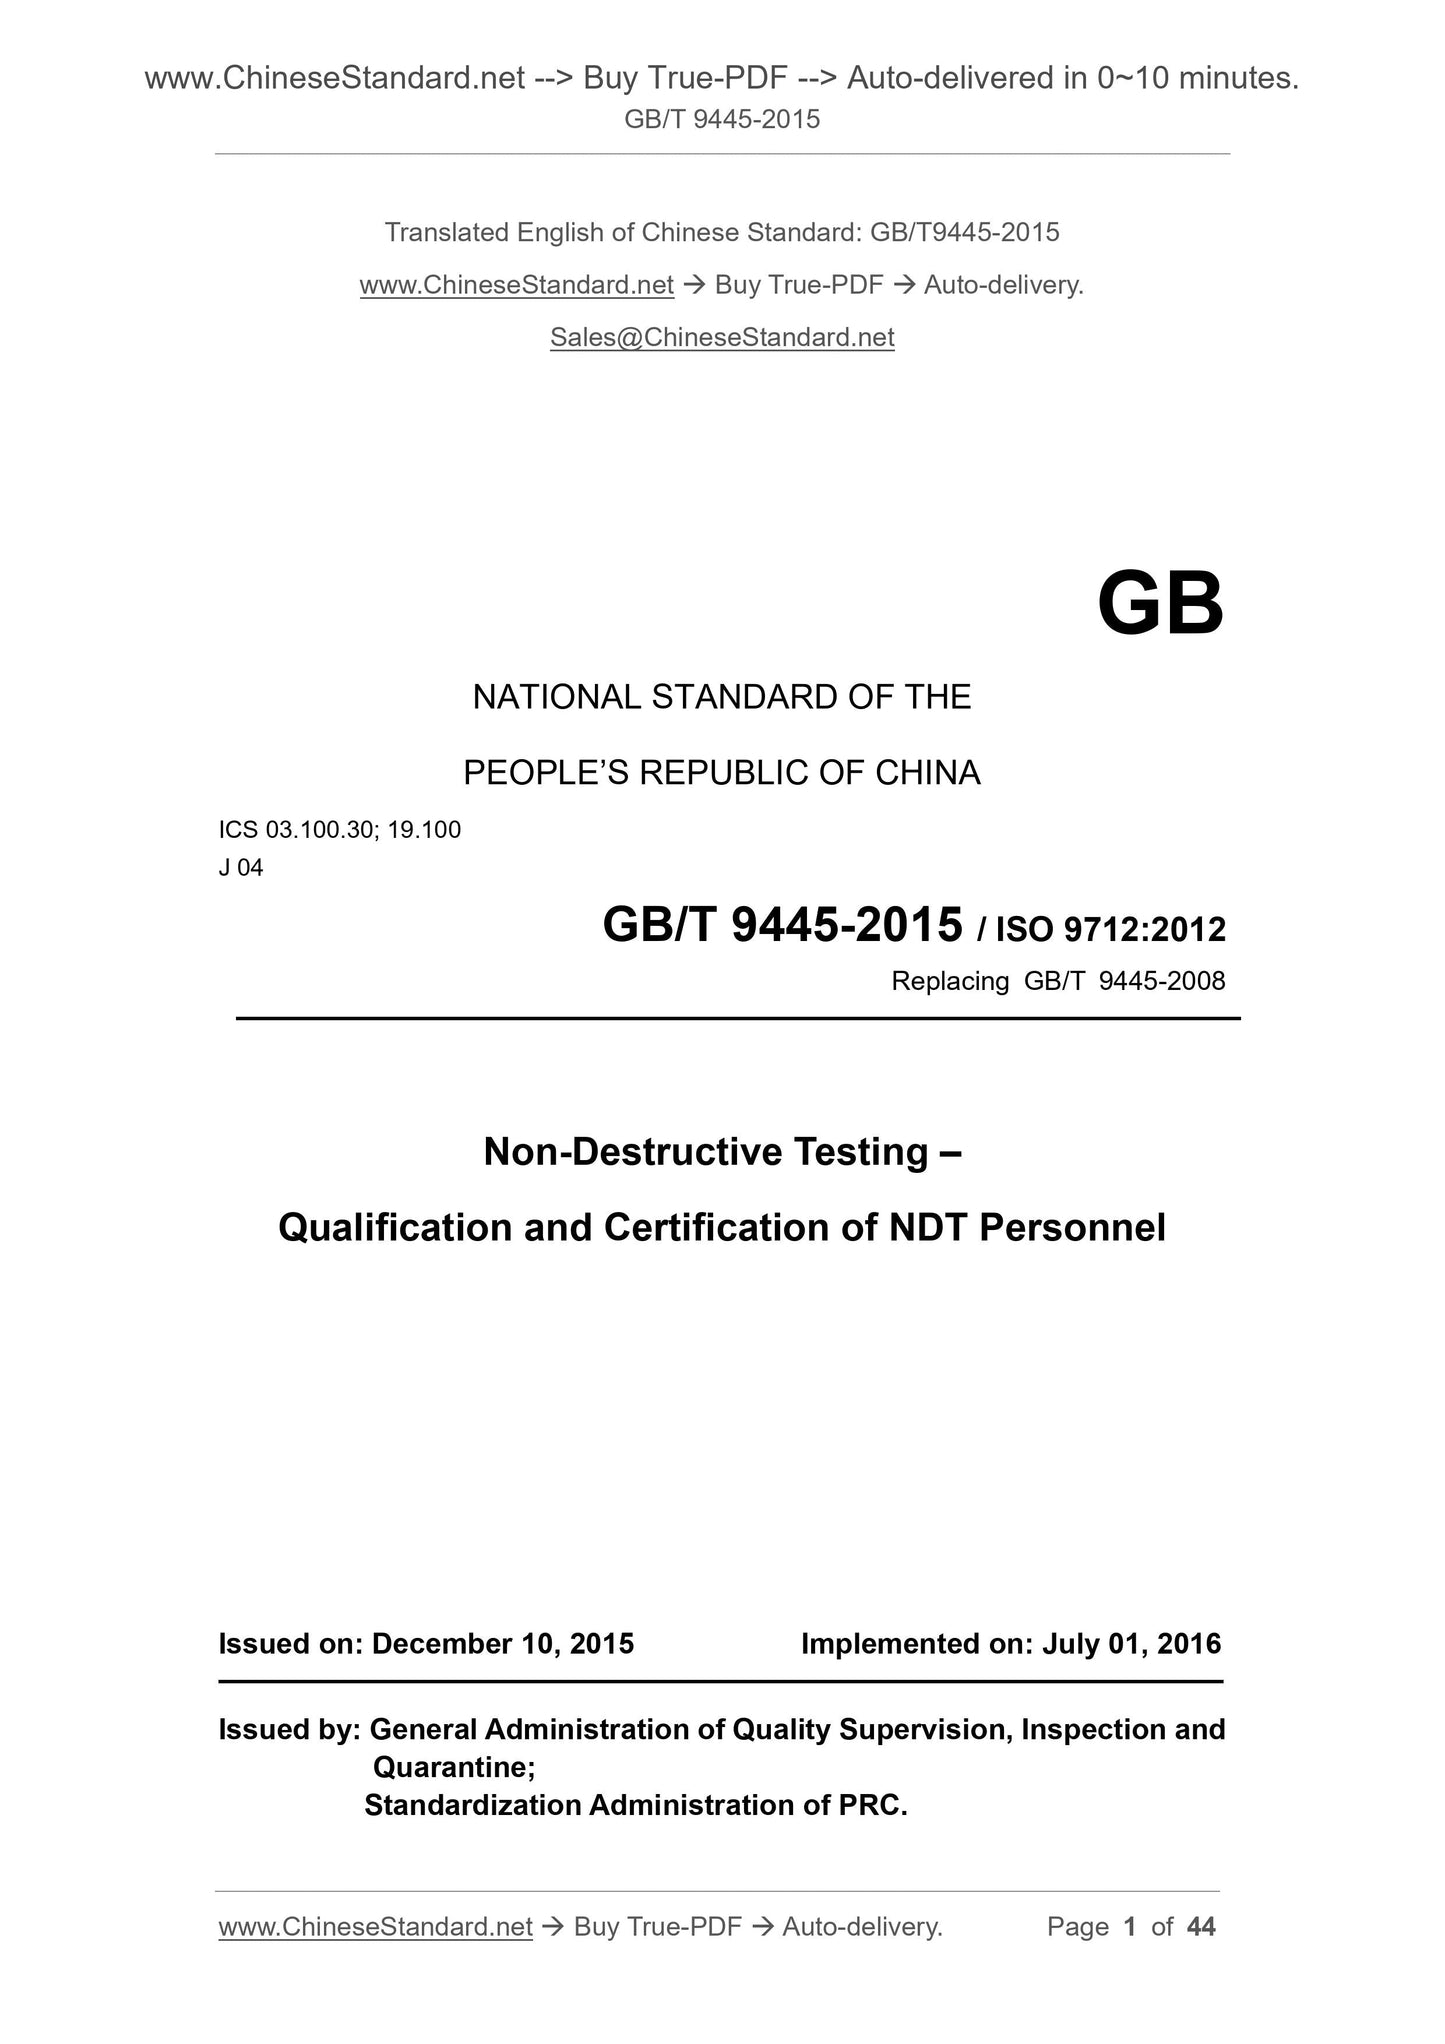 GB/T 9445-2015 Page 1